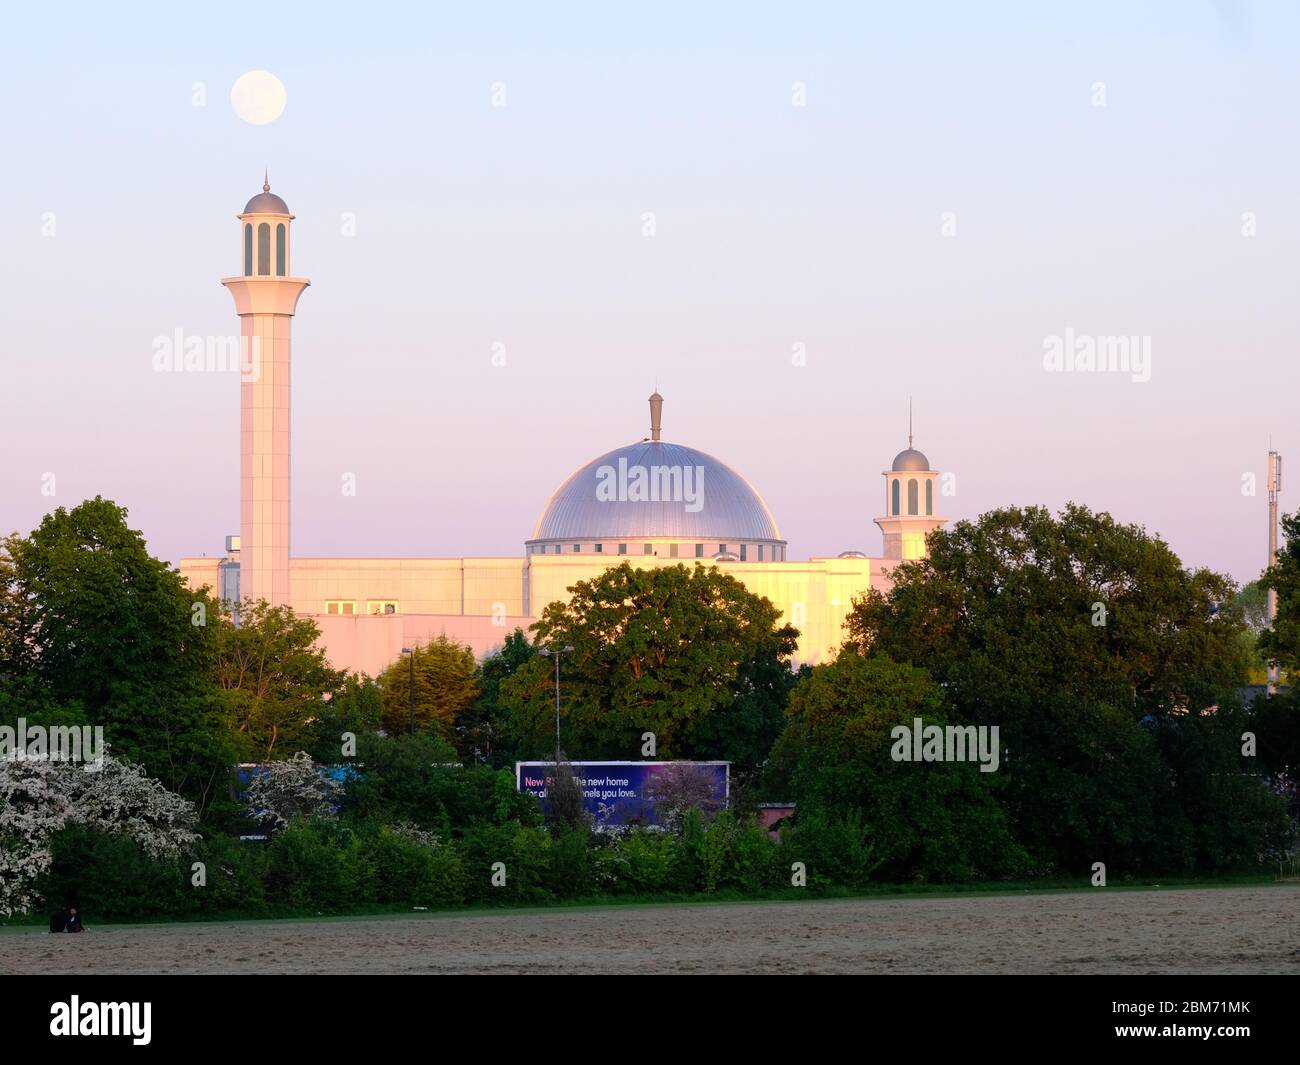 This year's final Supermoon rises on 6th May 2020 from behind the Baitul Futuh mosque in SW London. May's moon is known as the Flower moon. Stock Photo